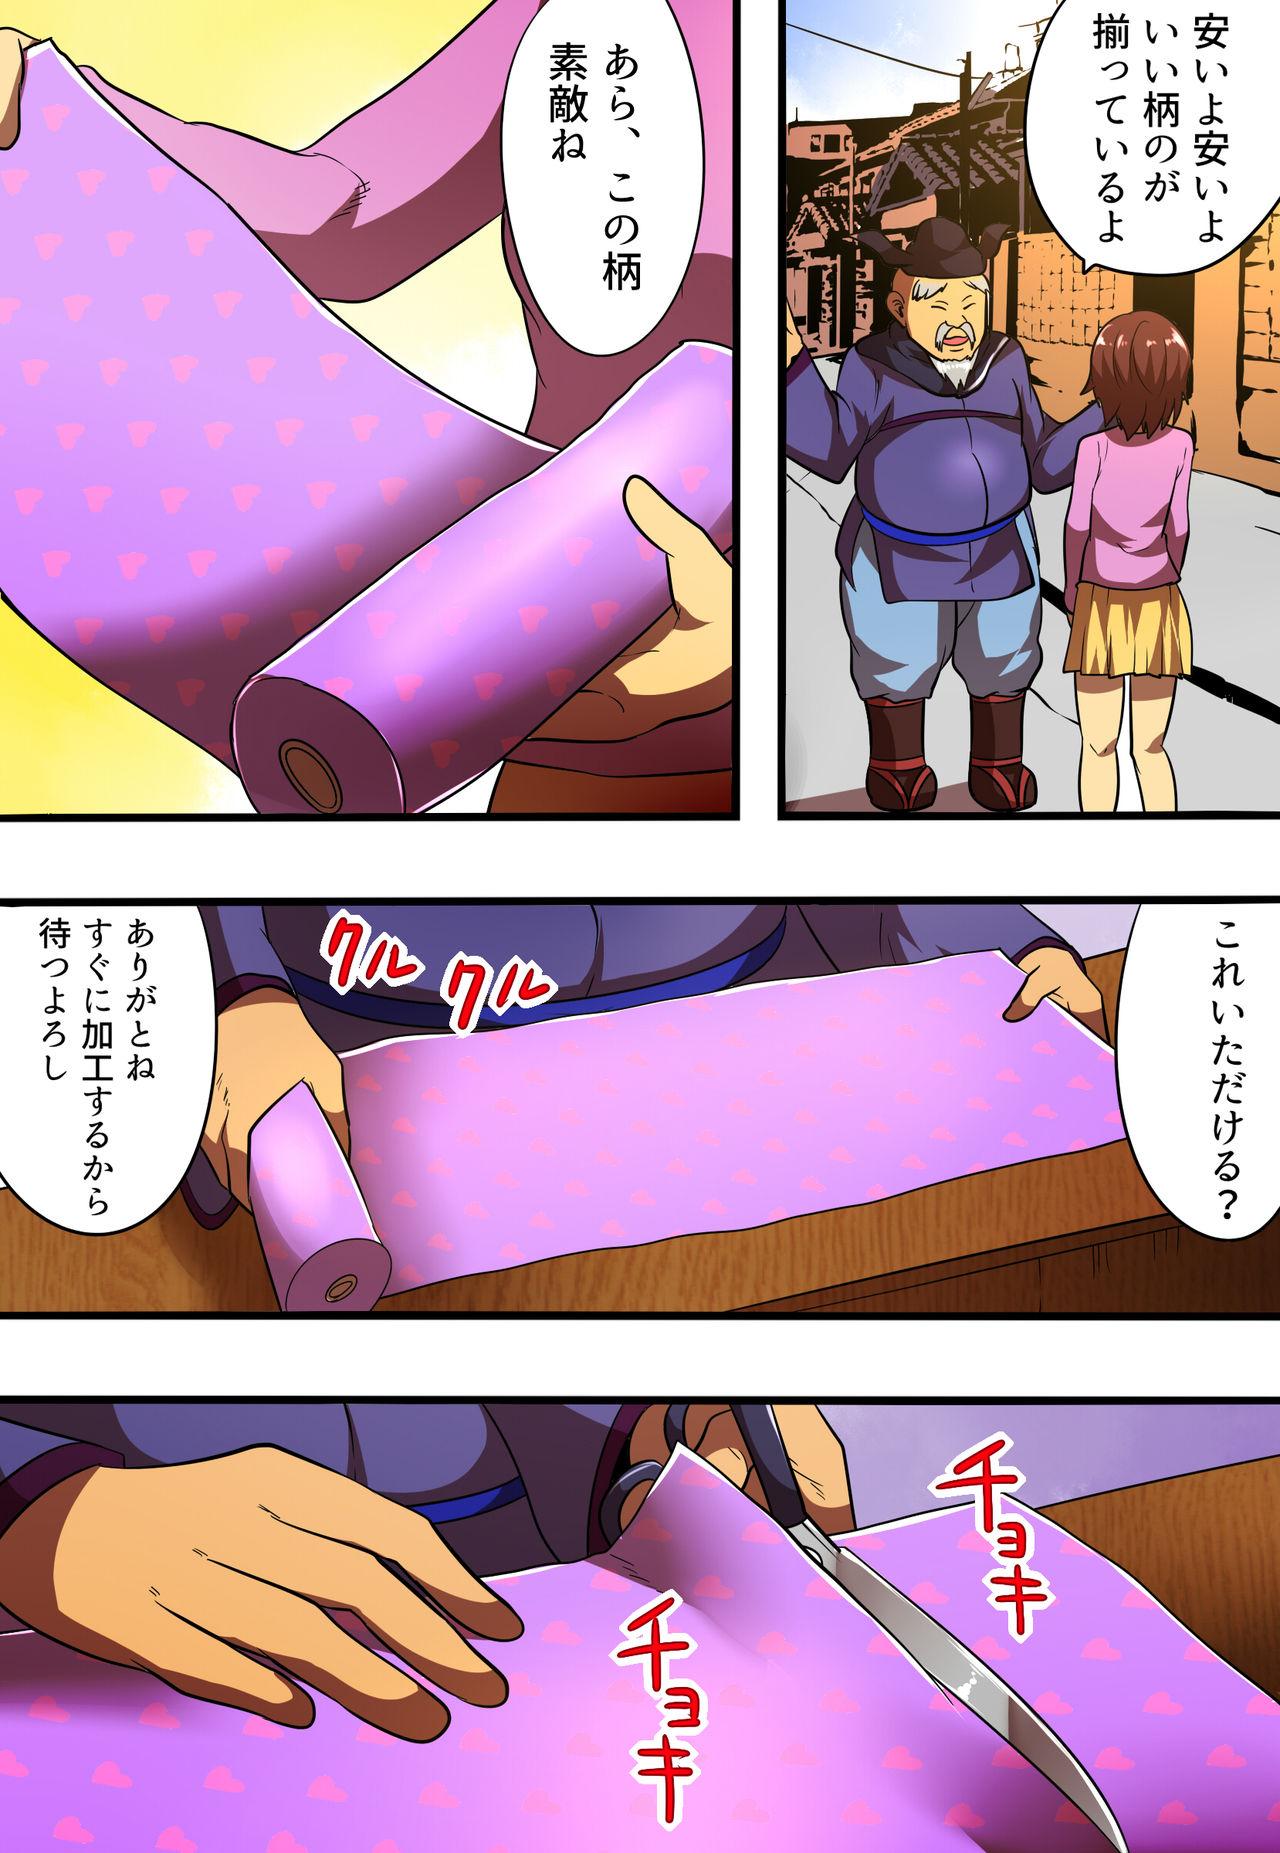 Nasty Free Porn shinenkan Comic of Textile-ification ghost storys Masterbation - Page 6